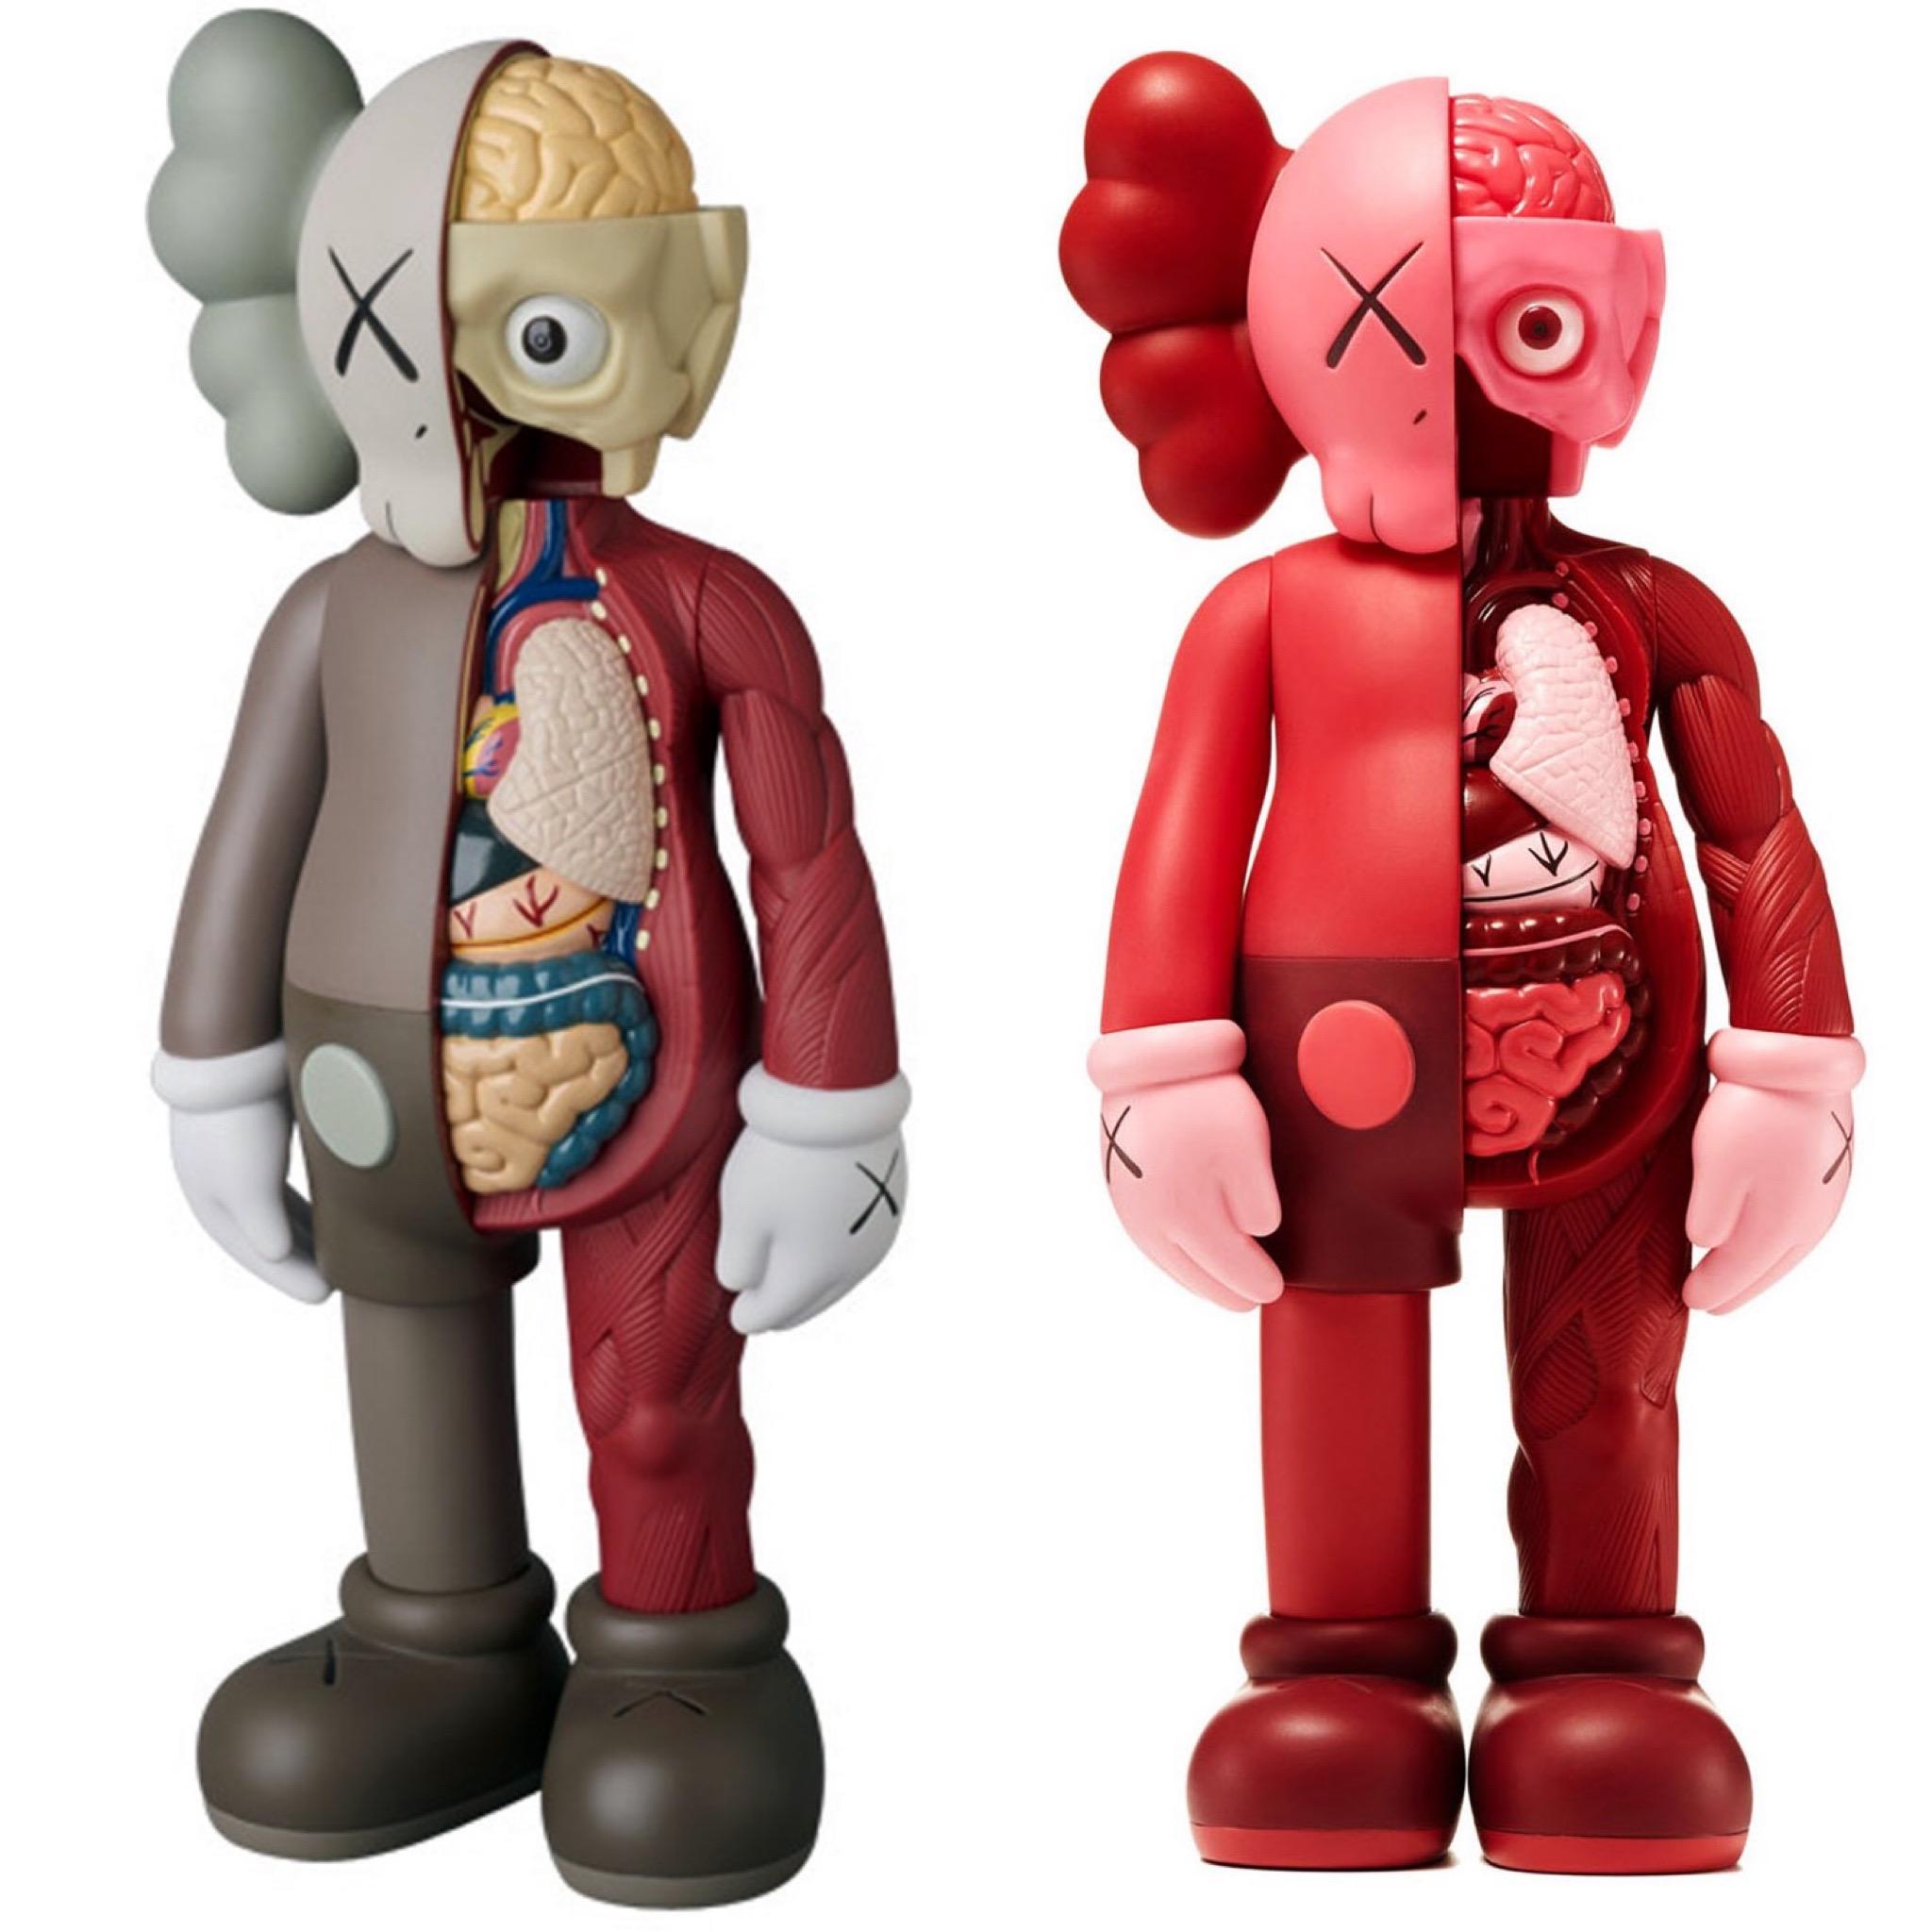 MEDICOM TOY KAWS COMPANION RED FLAYED OPEN EDITION FIGURE 